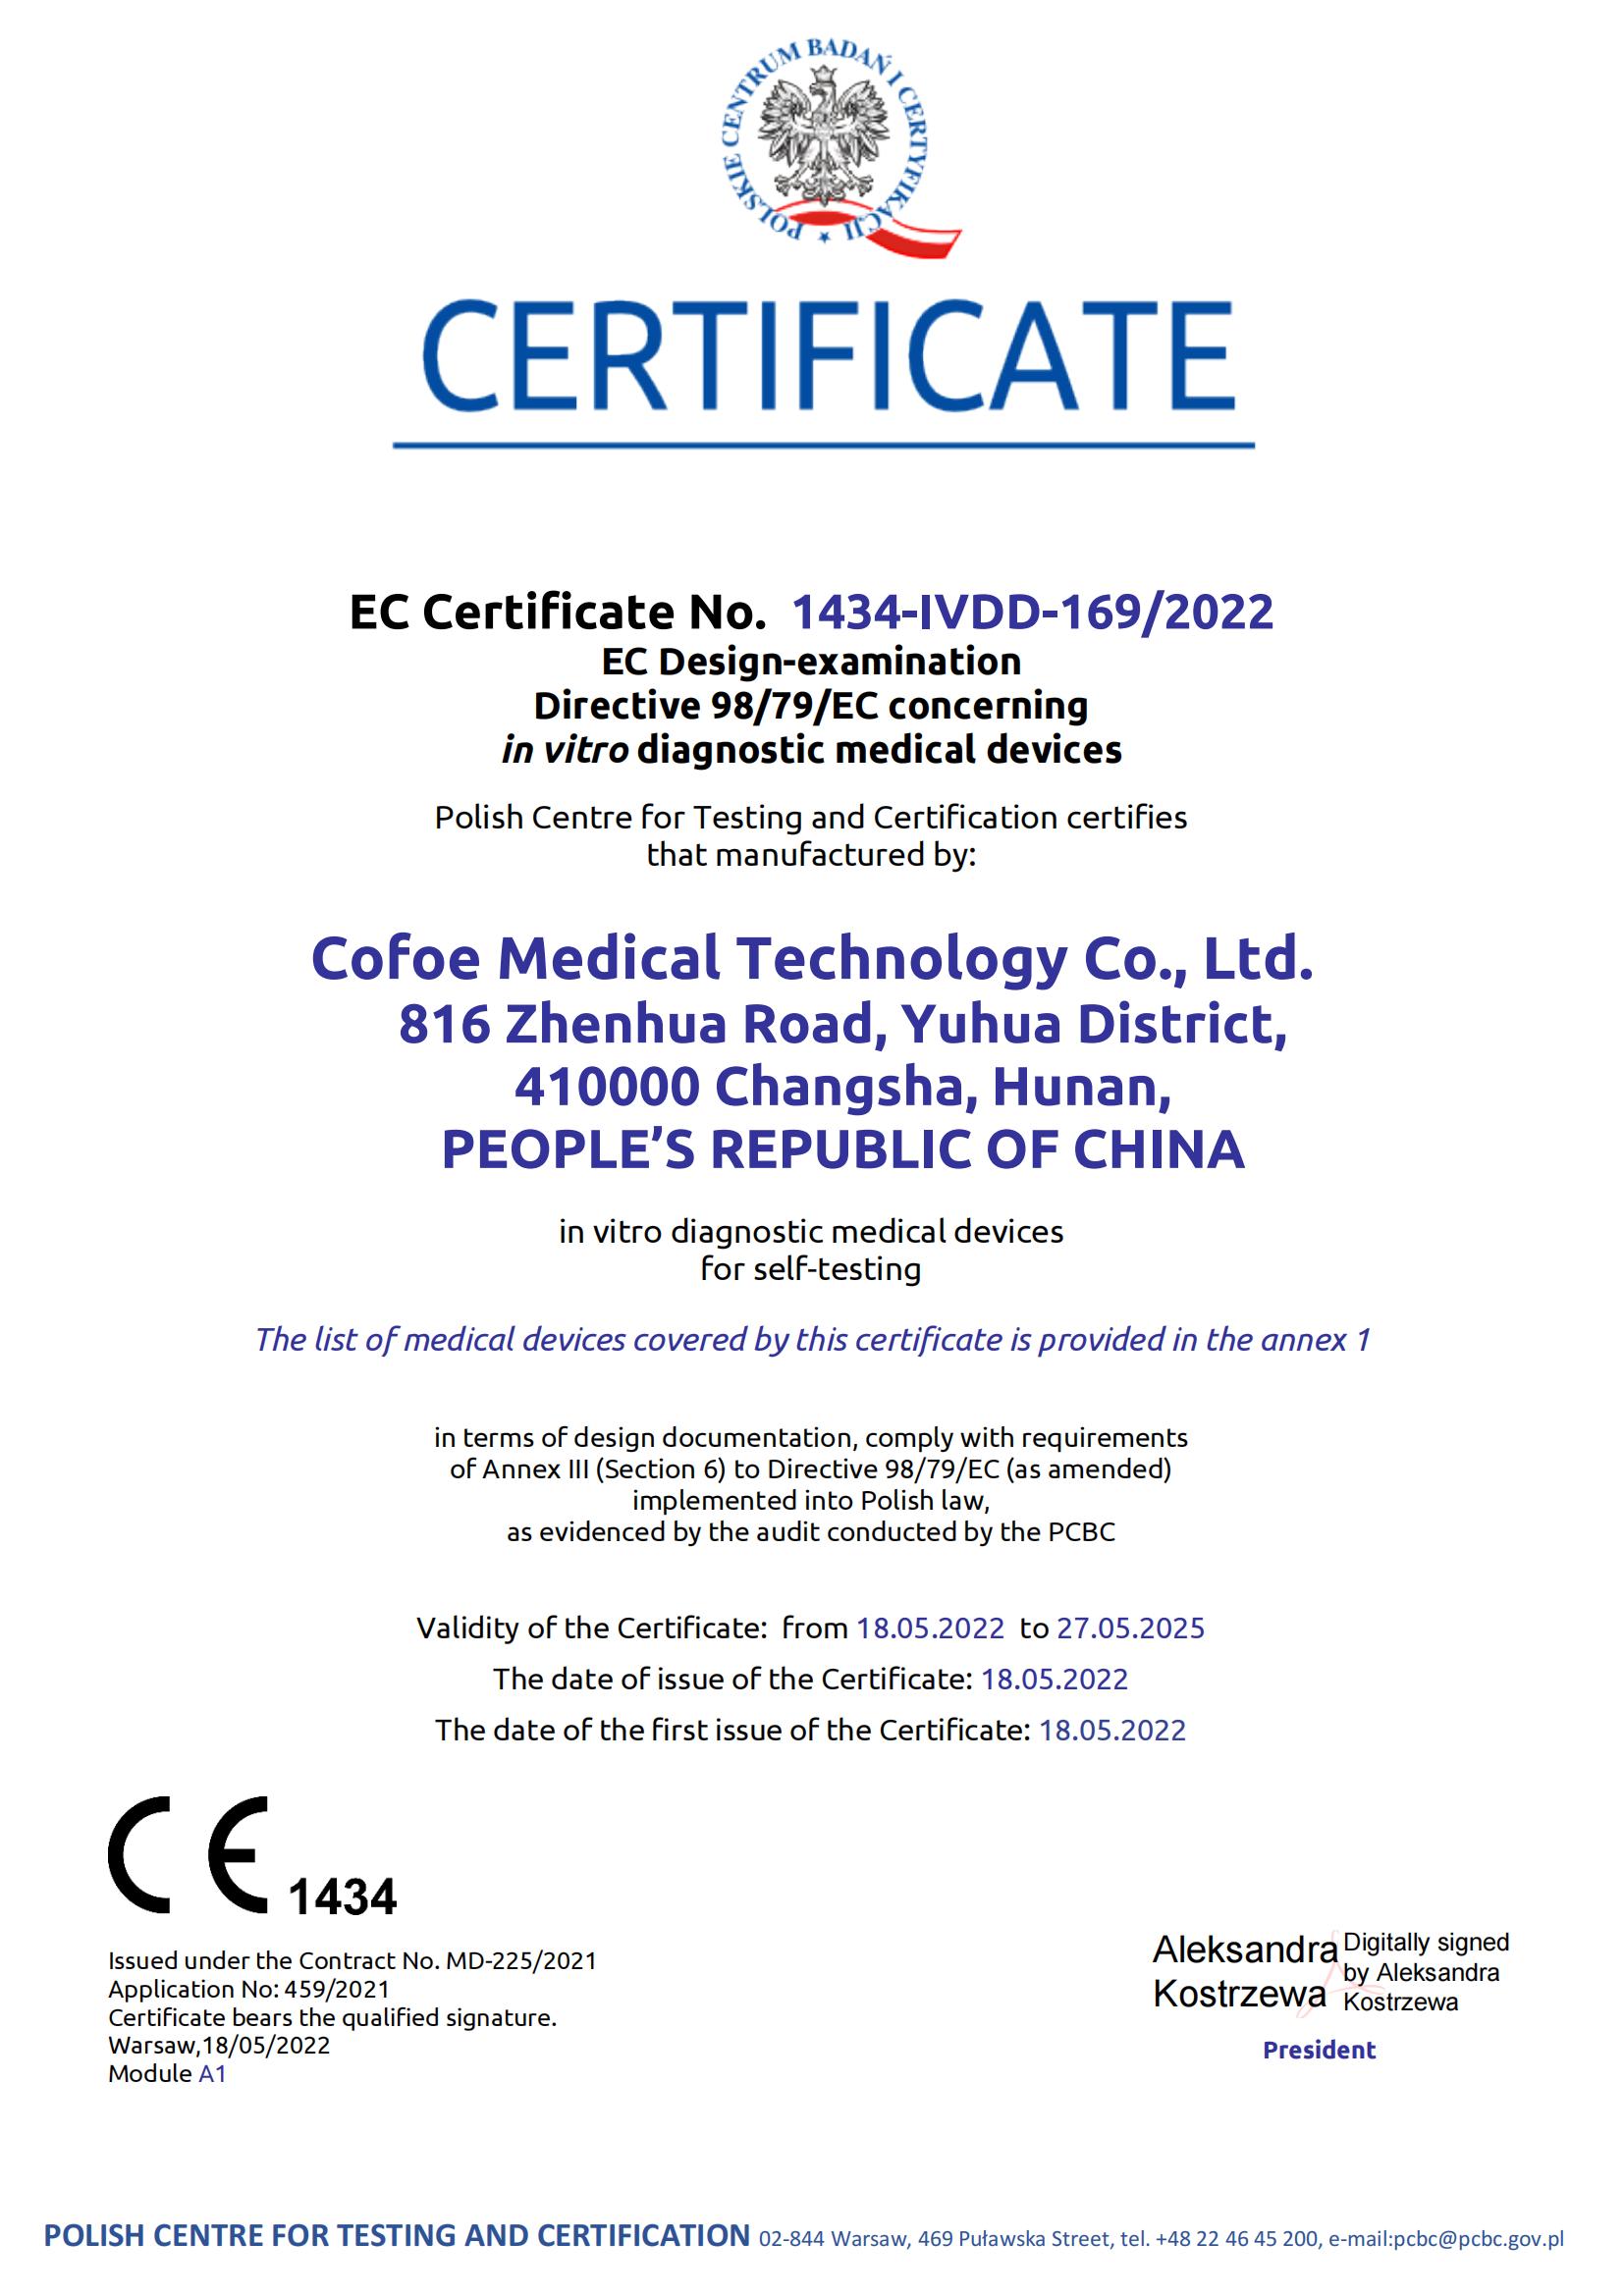 Cofoe got AG self-test access to EU markets after getting the CE1434 Certificate on 18th May